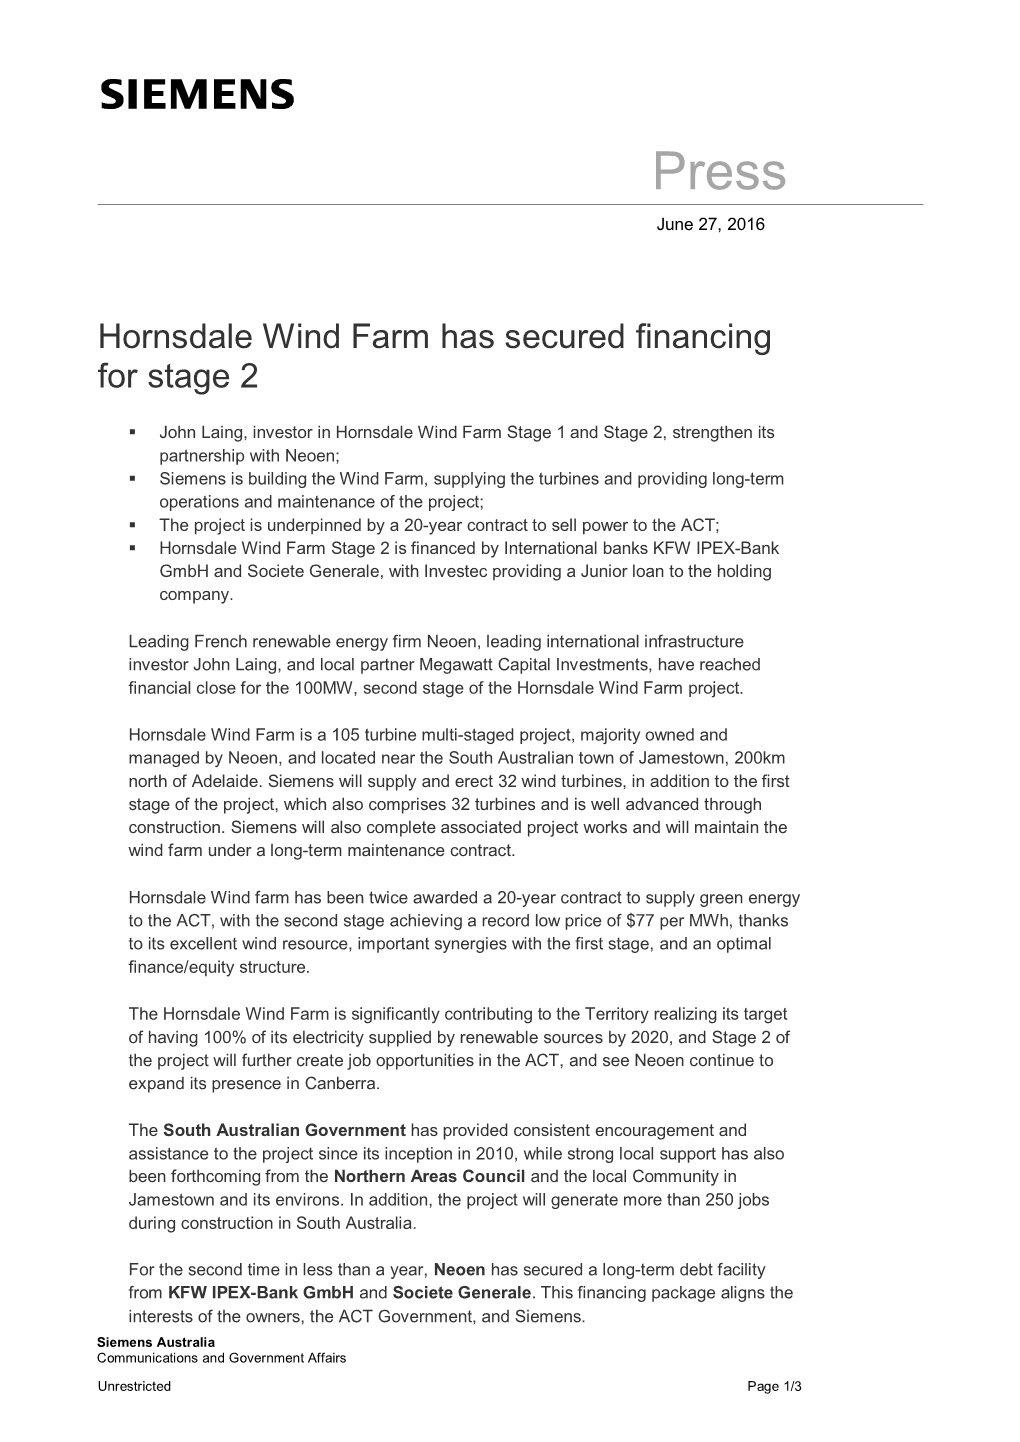 Hornsdale Wind Farm Has Secured Financing for Stage 2